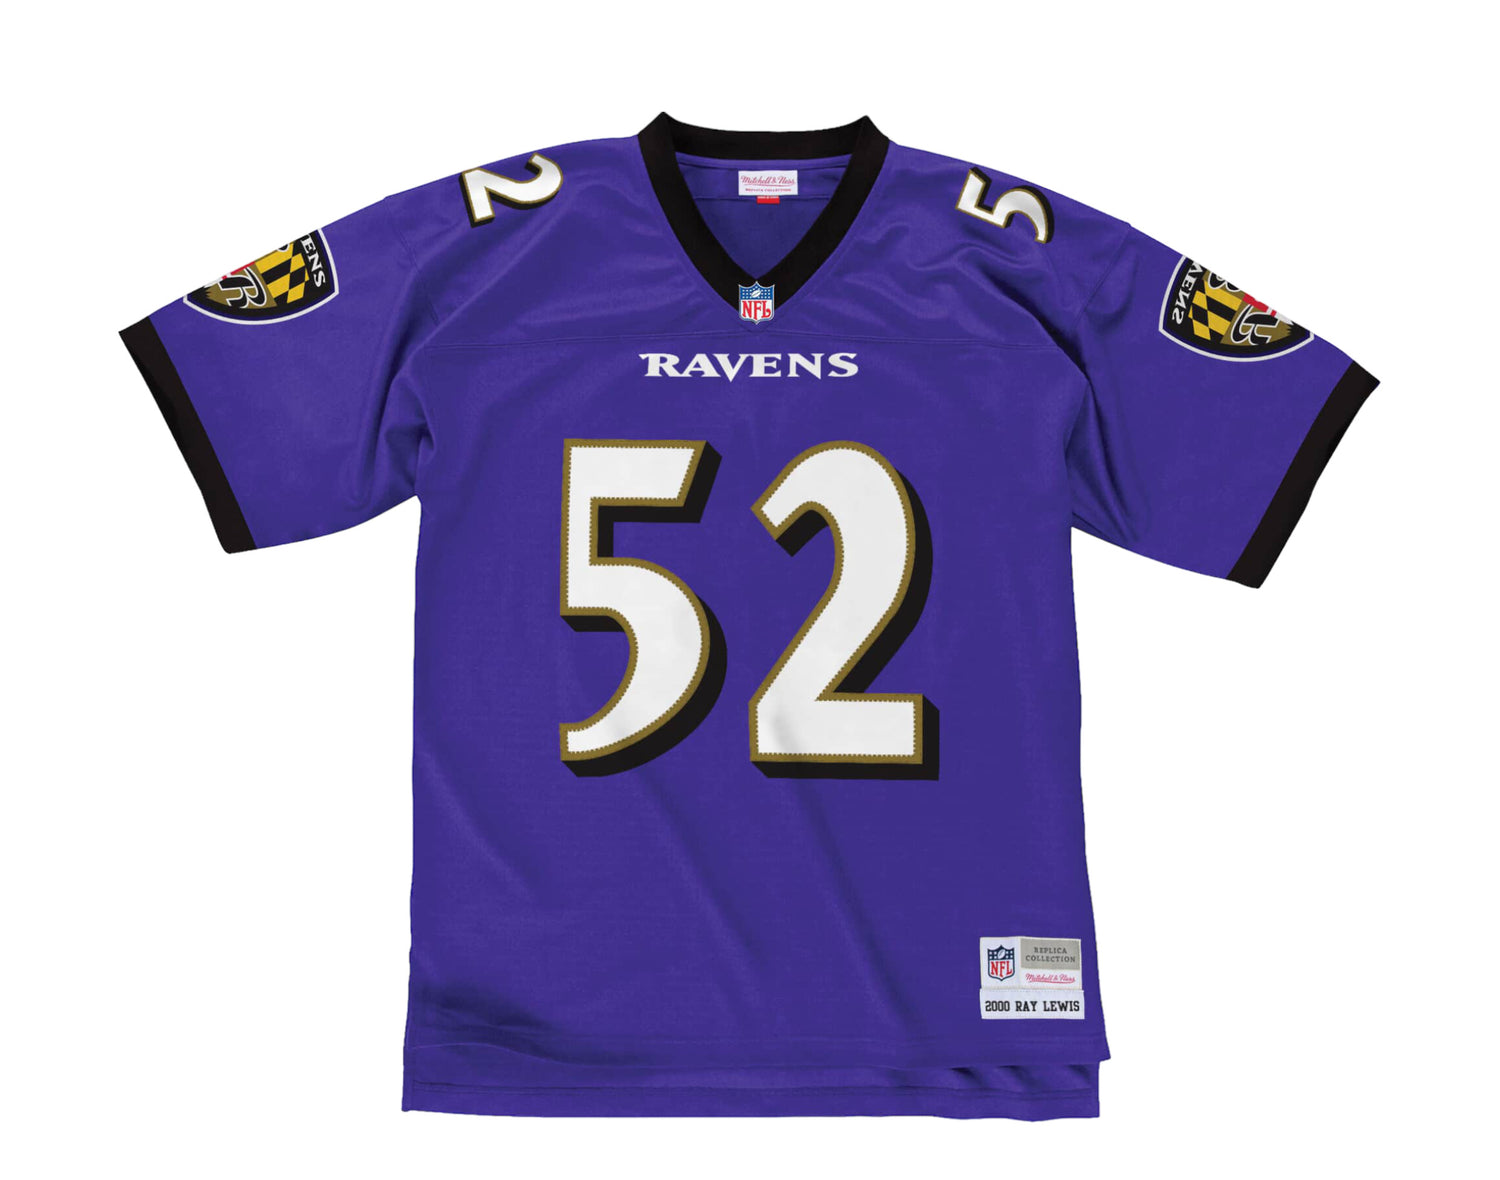 Mitchell & Ness Legacy Baltimore Ravens 2000 Ray Lewis Jersey